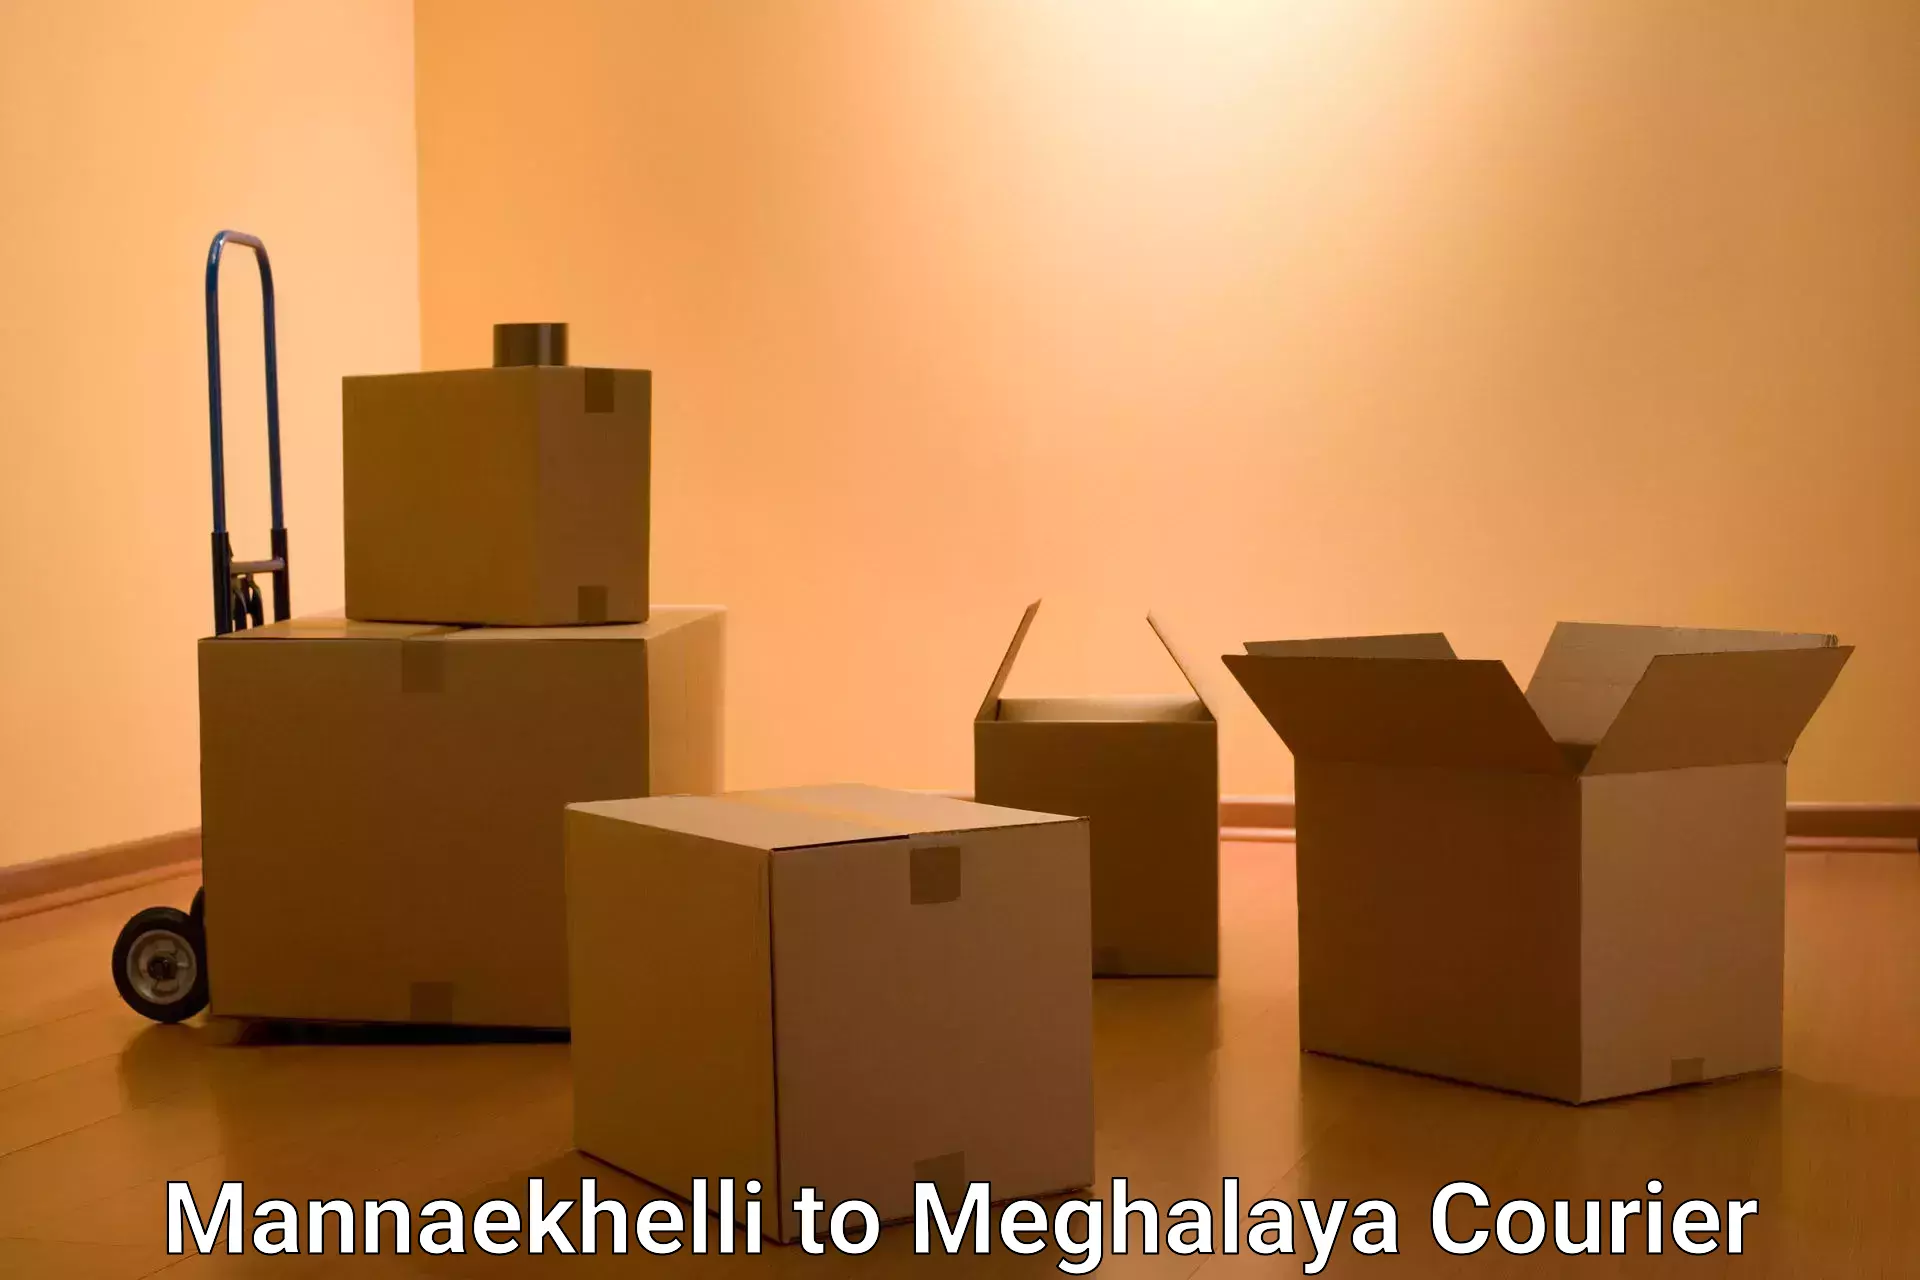 Package delivery network Mannaekhelli to Tura